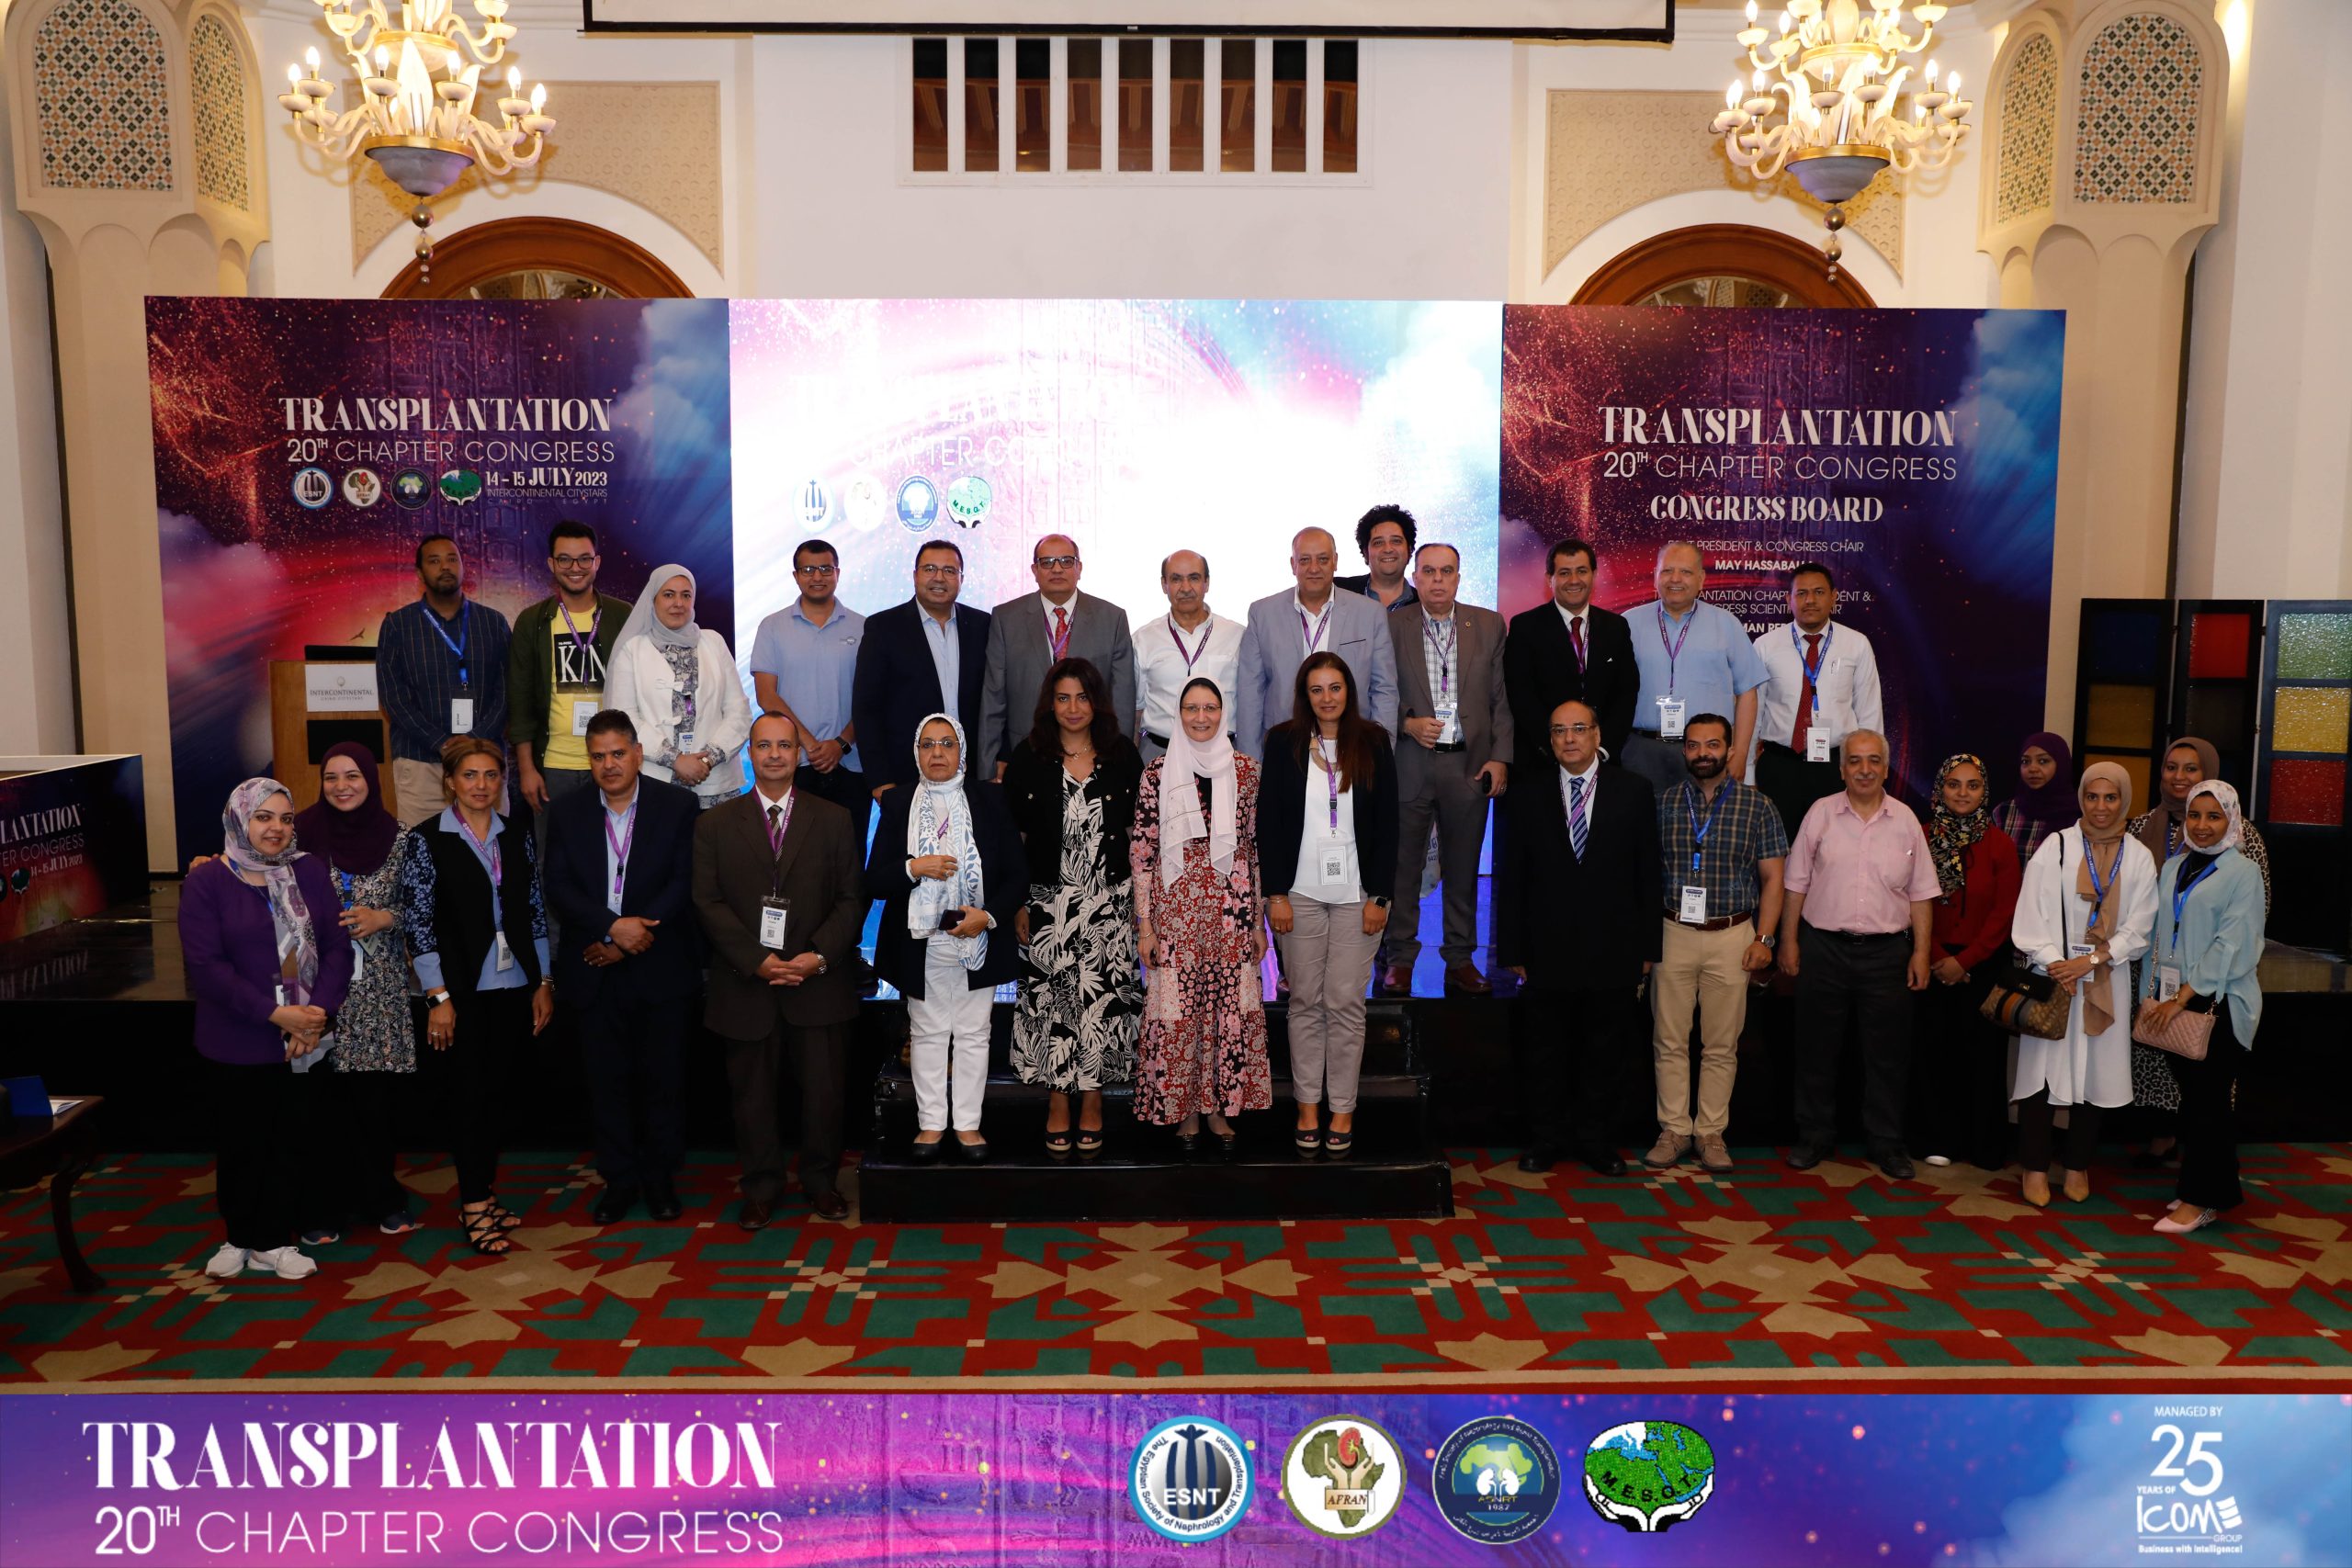 The 20th Transplantation Chapter Congress